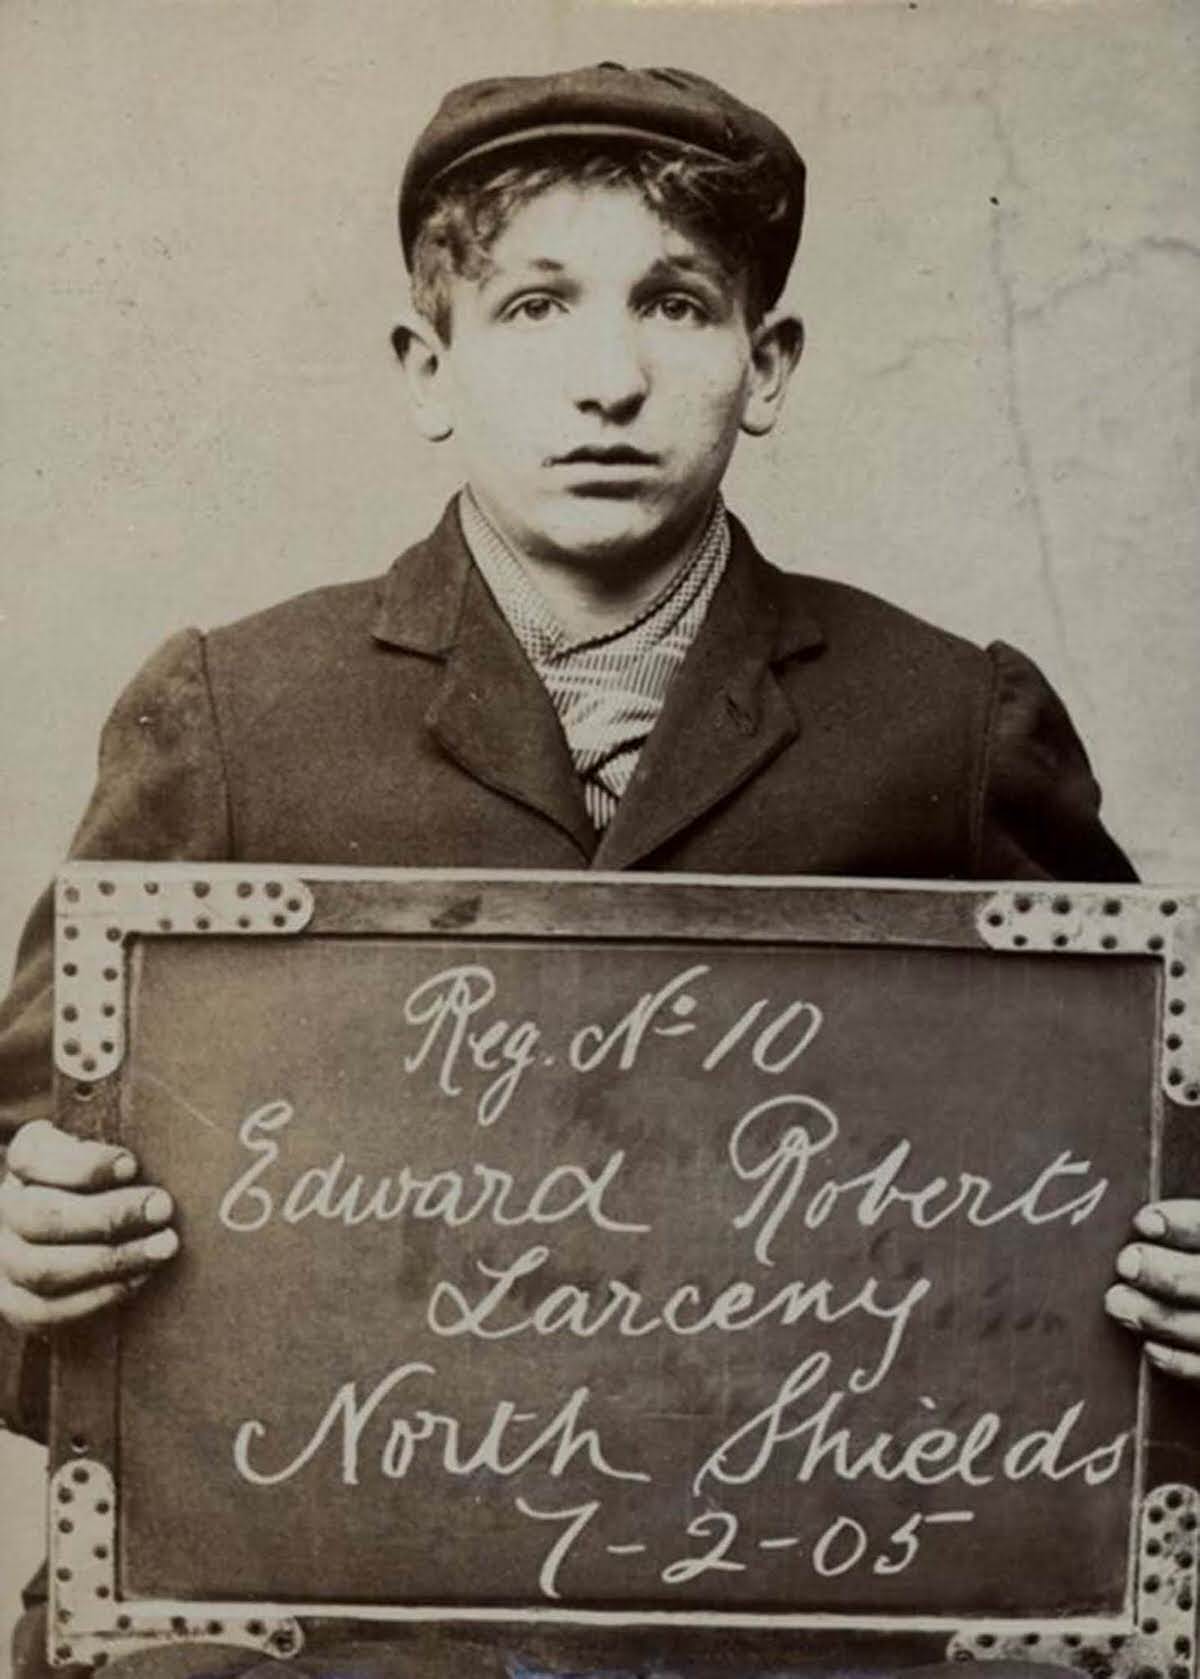 Edward Roberts, 19, arrested for stealing from a gas meter, 1905.